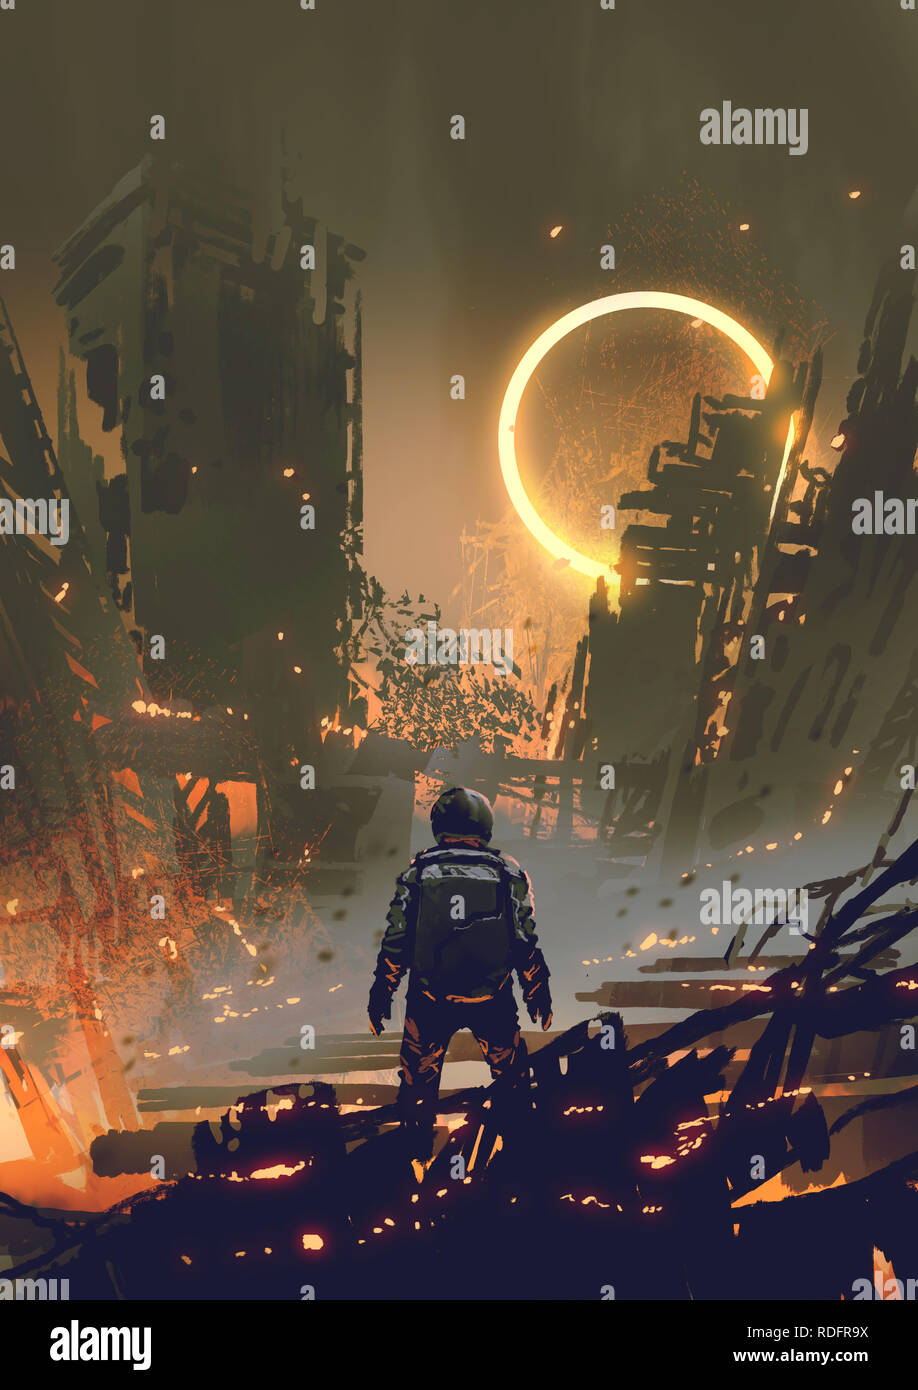 astronaut standing in a burnt city and looking at a yellow glowing ring in the dark sky, digital art style, illustration painting Stock Photo